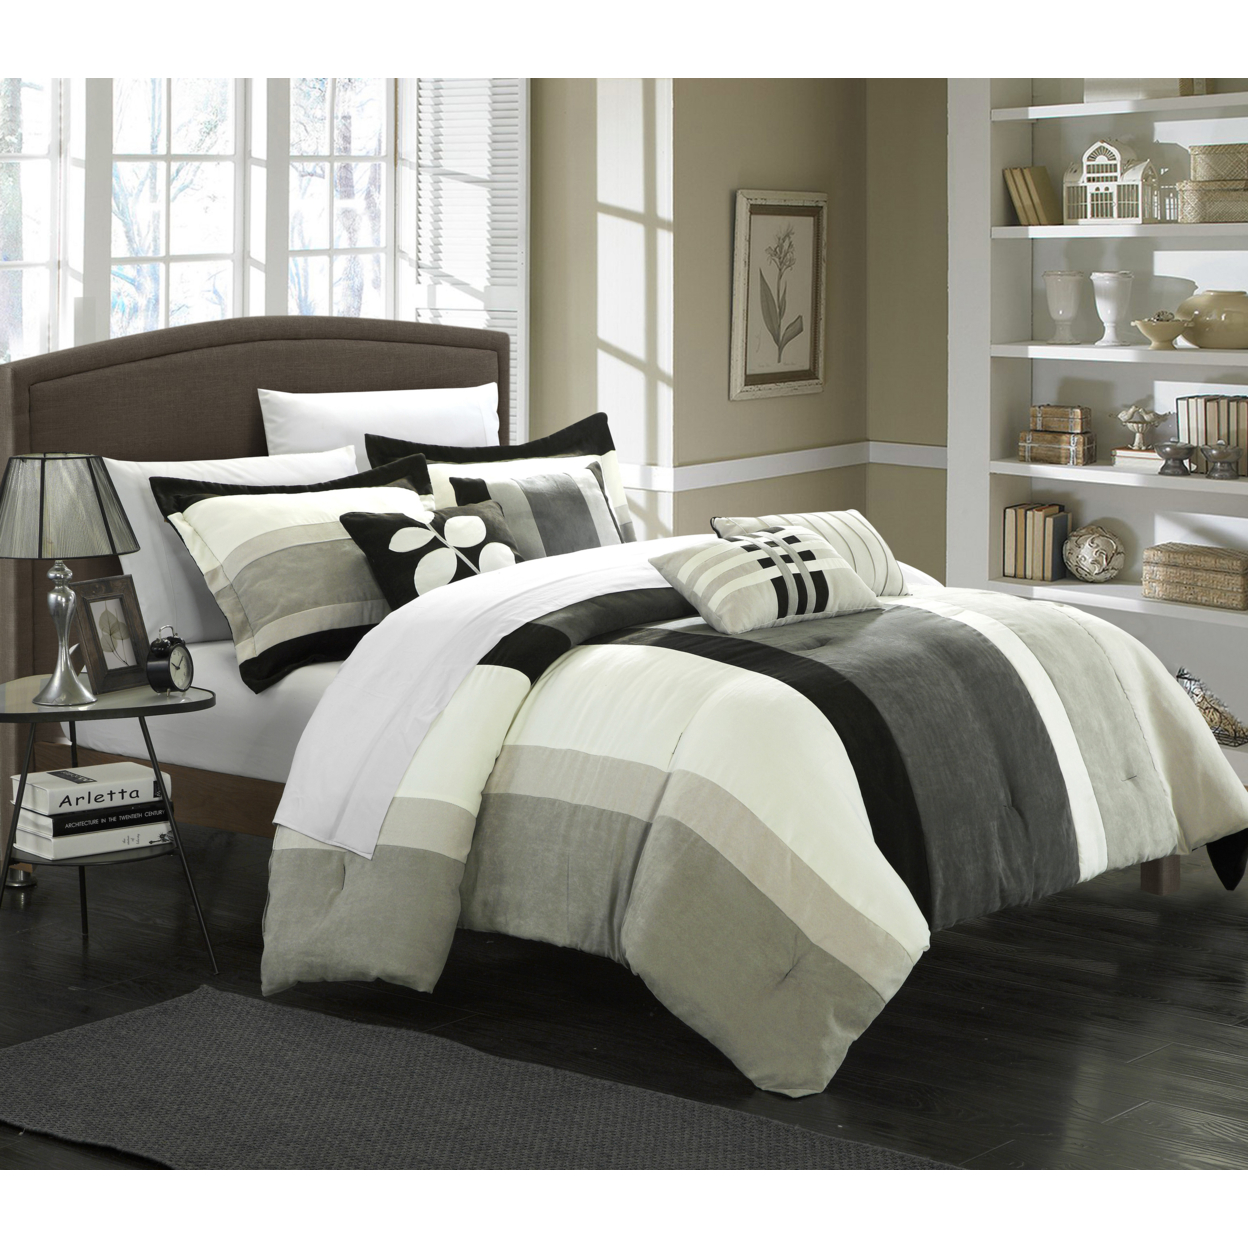 Chic Home Melodie 7-Piece Plush Microsuede Striped Comforter Set - Black, King